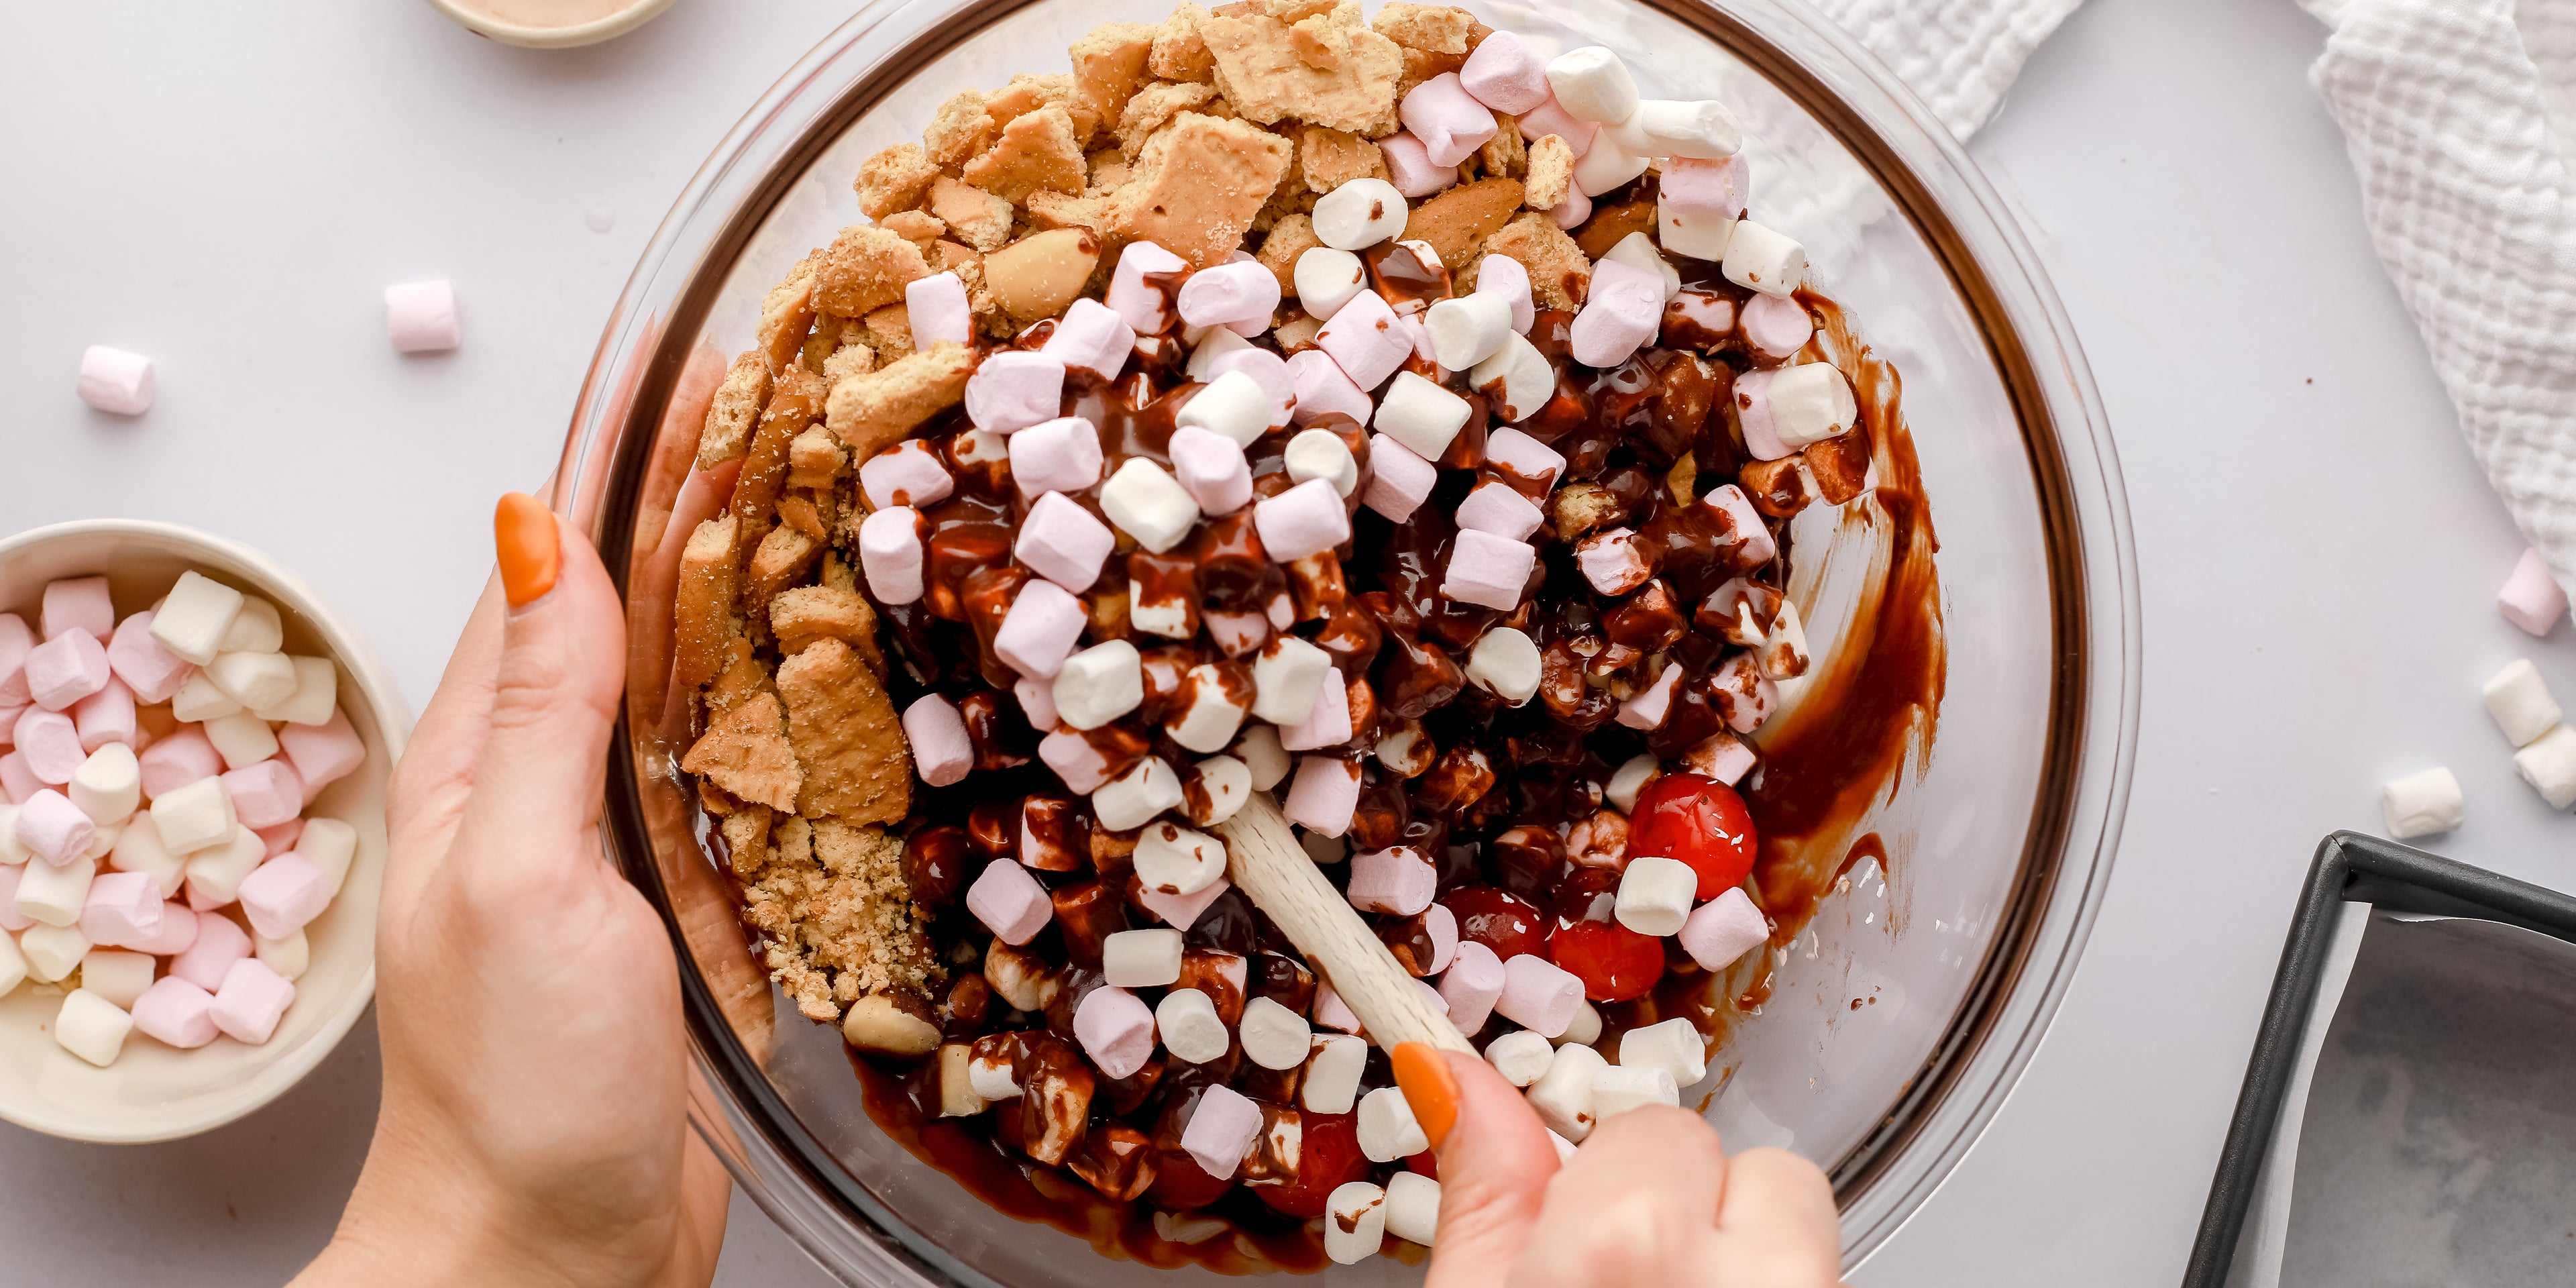 Rocky road ingredients being mixed together in a bowl